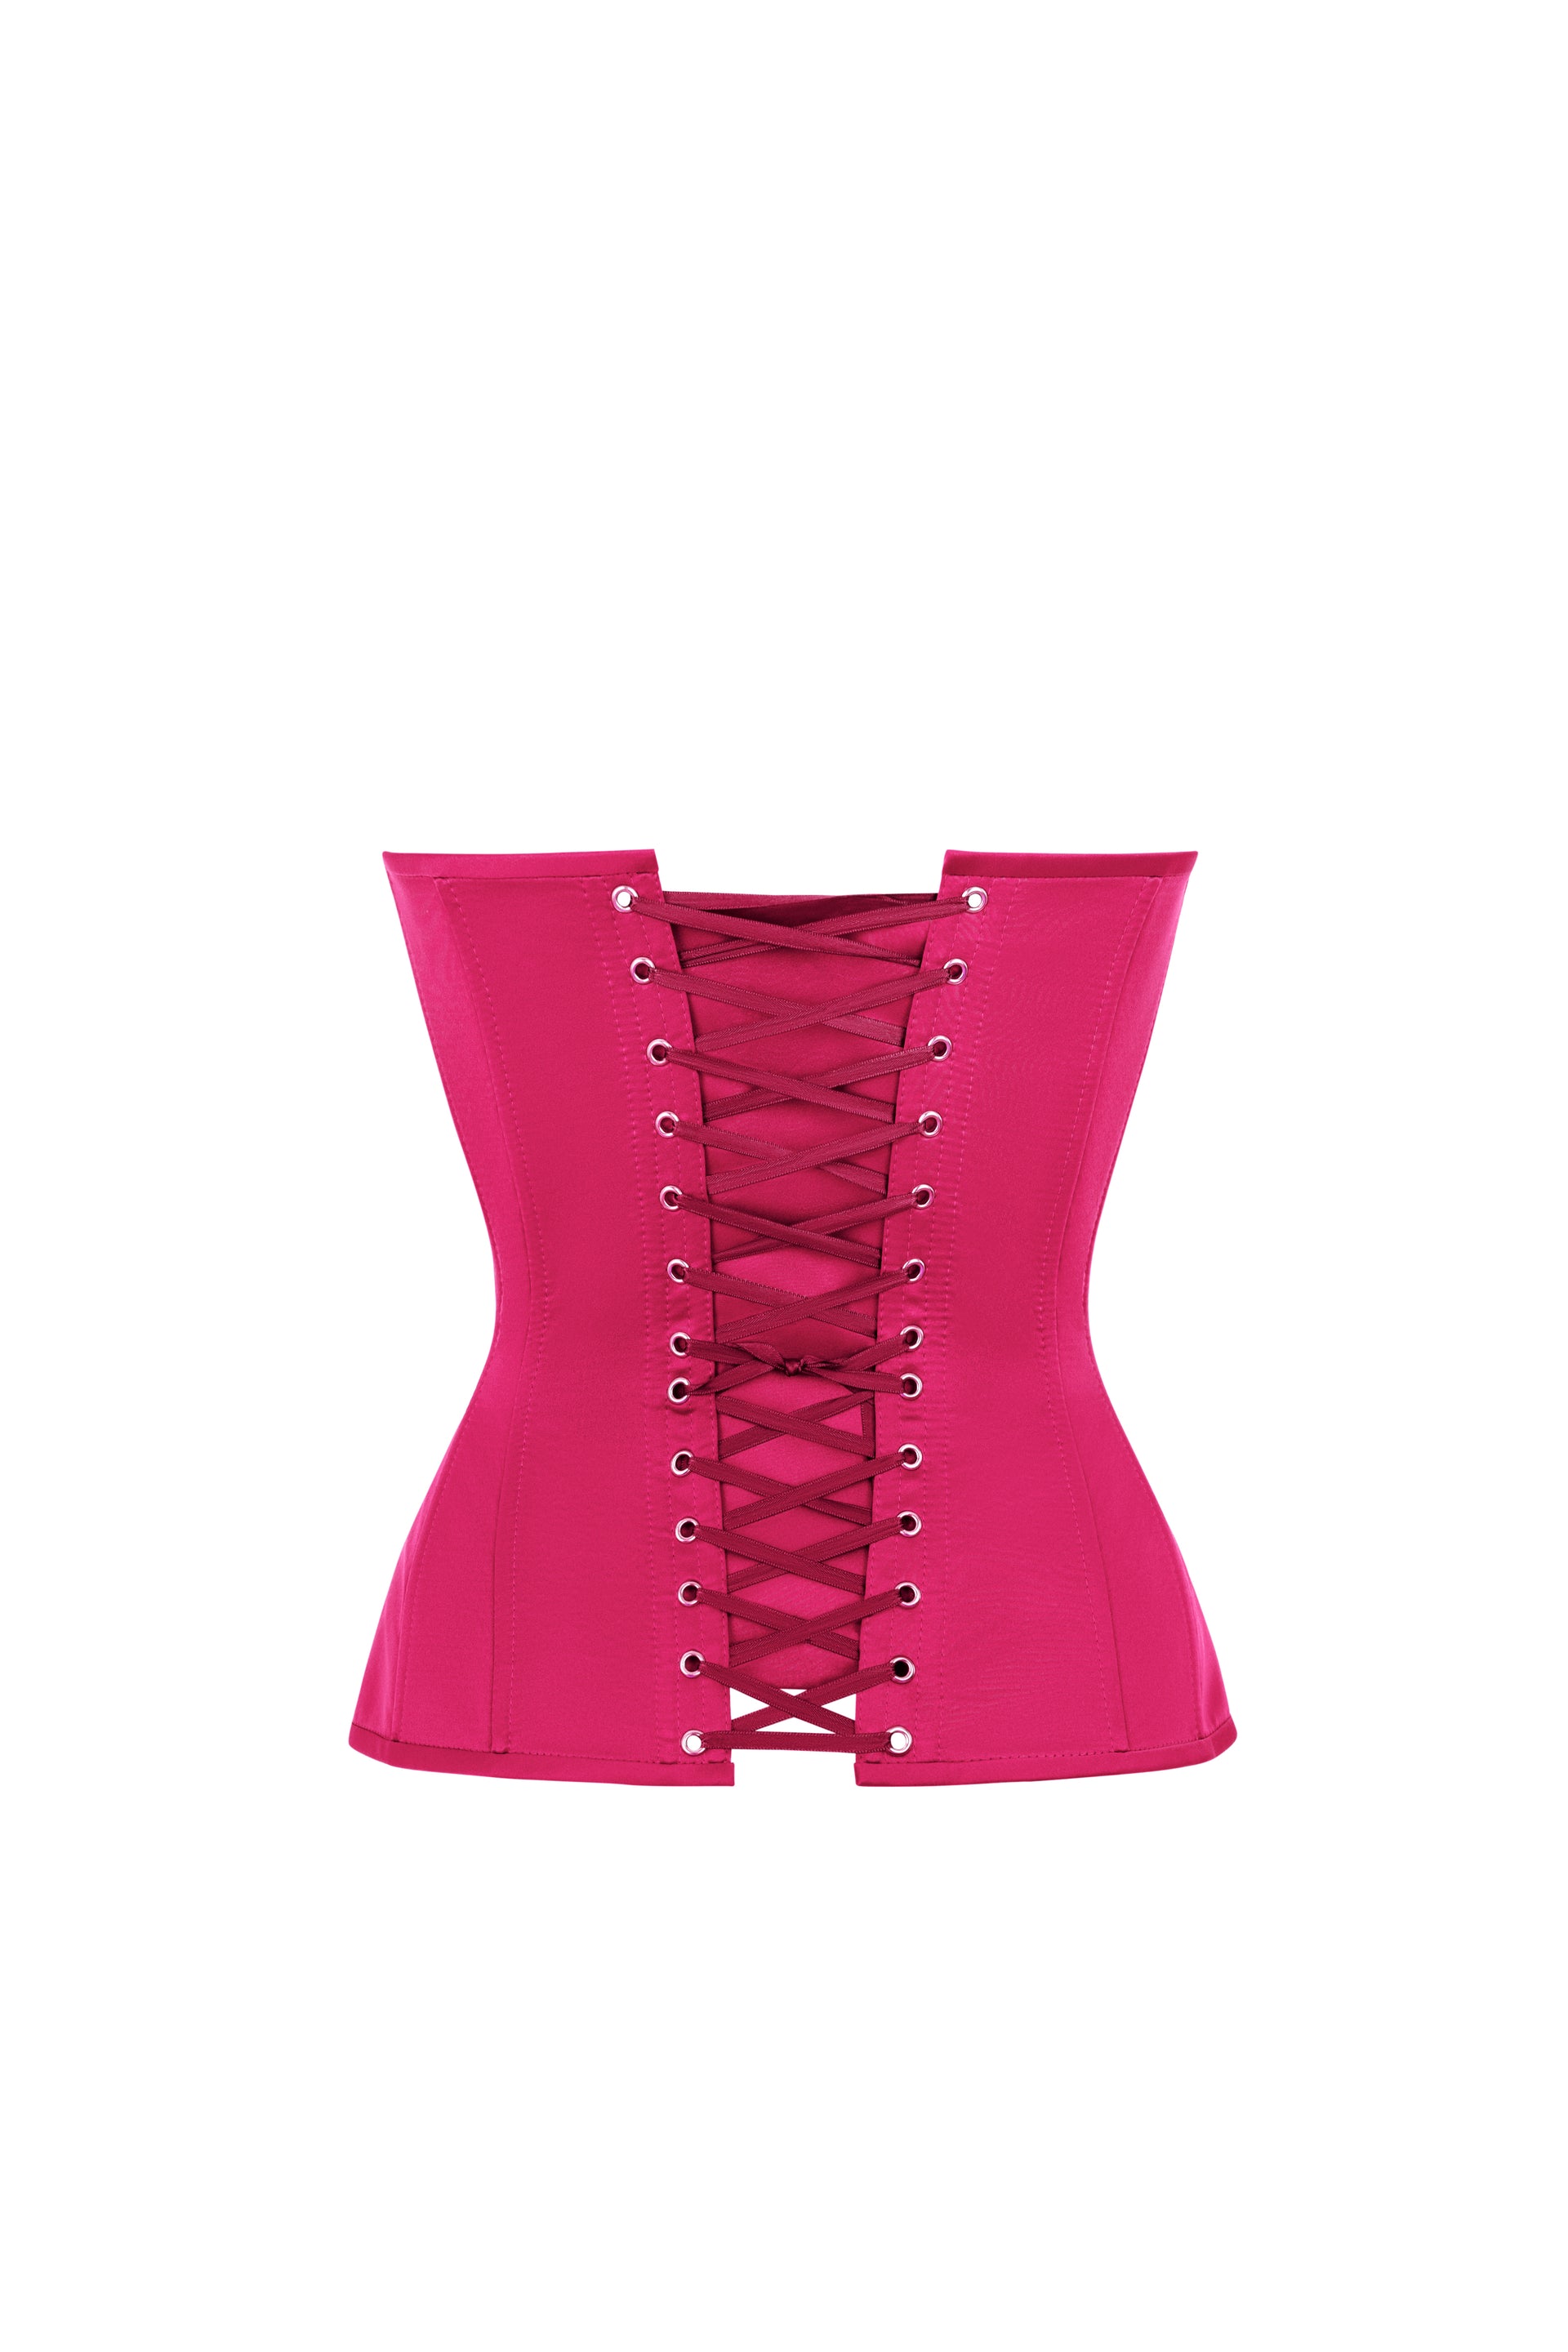 Shocking pink satin corset with cups